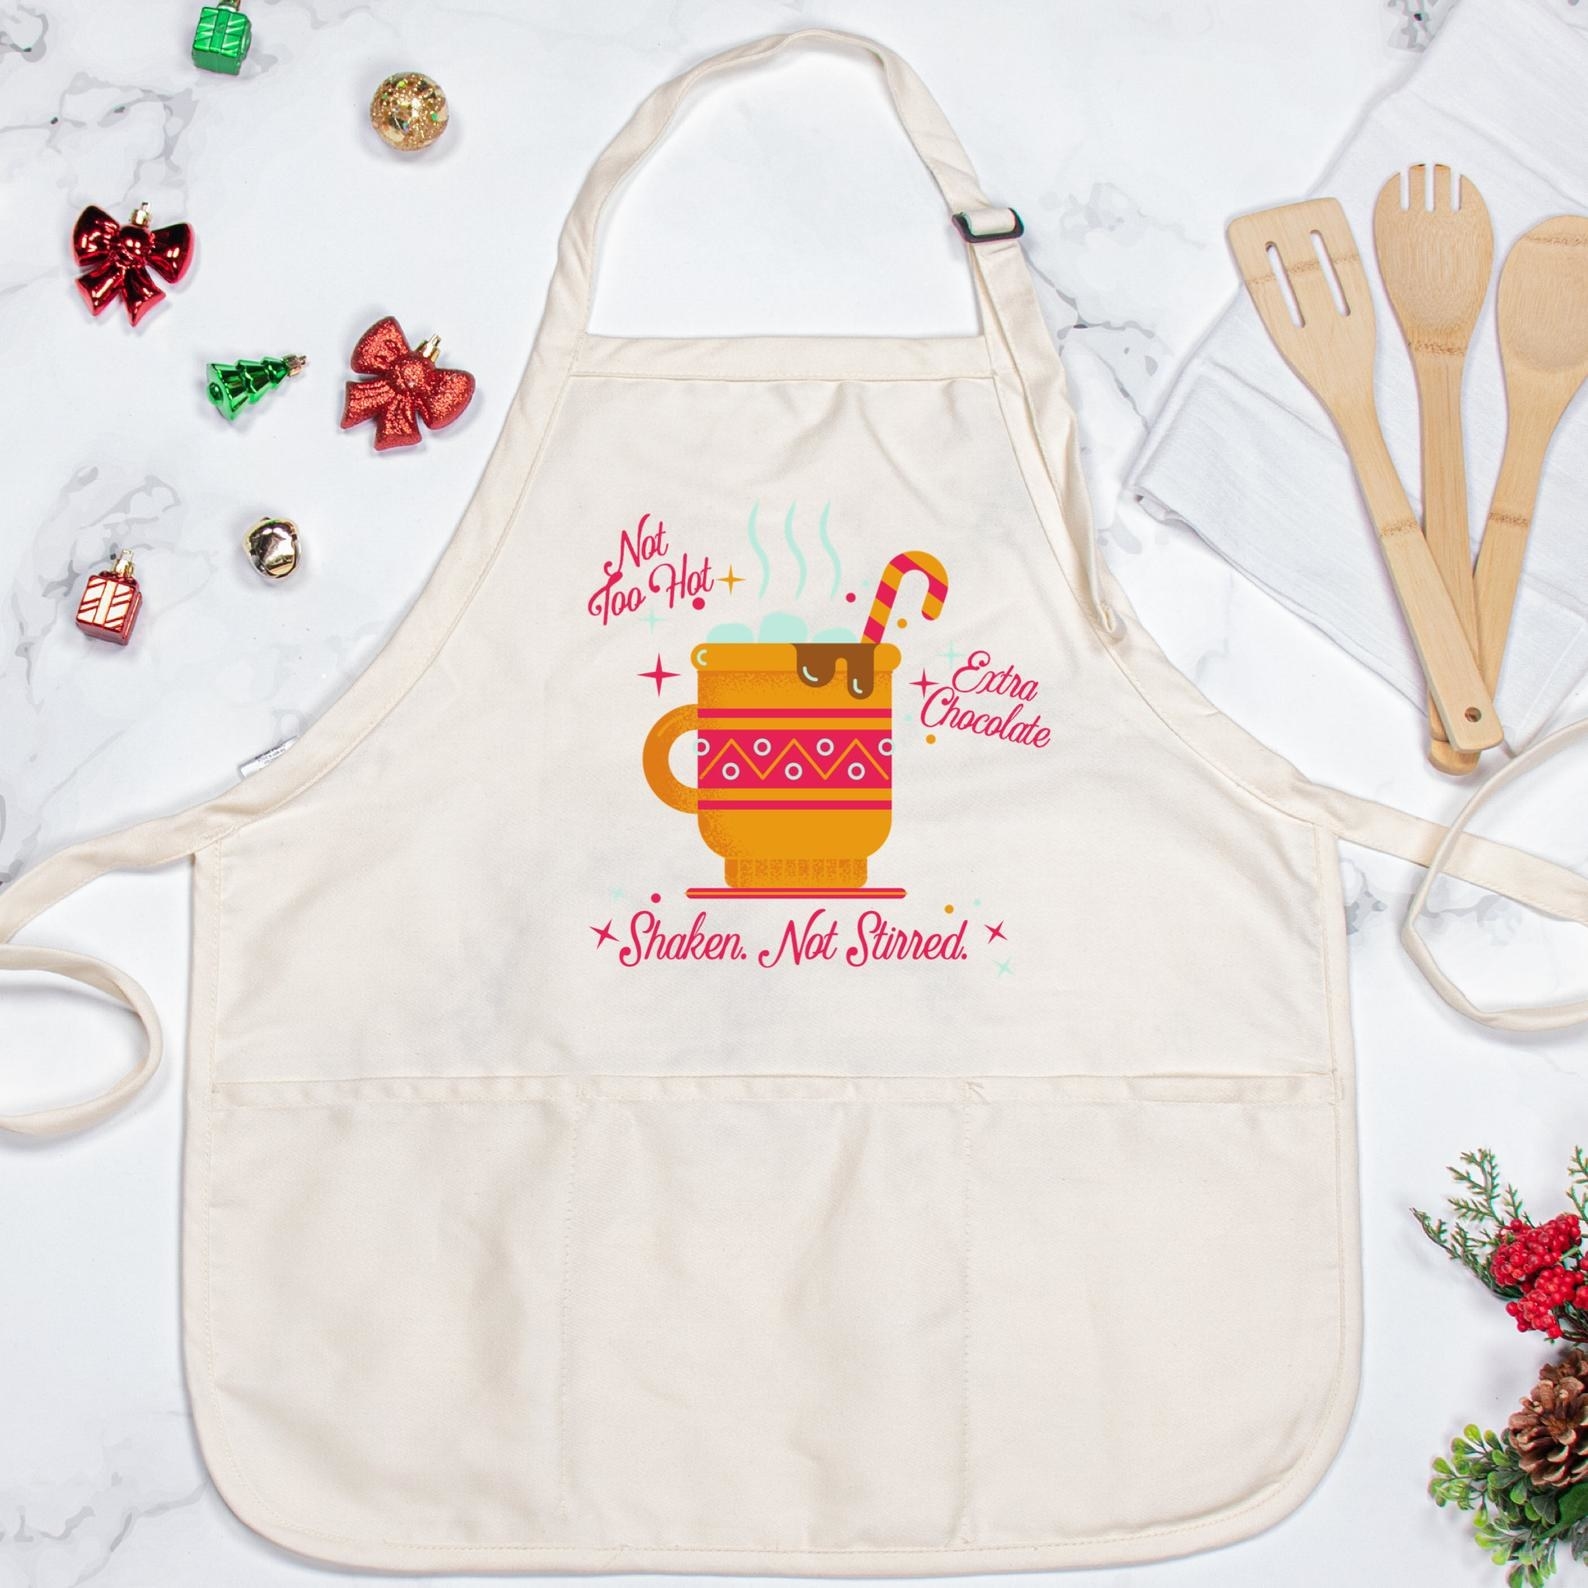 the apron with a mug of hot chocolate on it and the words &quot;not too hot, extra chocolate, shaken not stirred&quot;